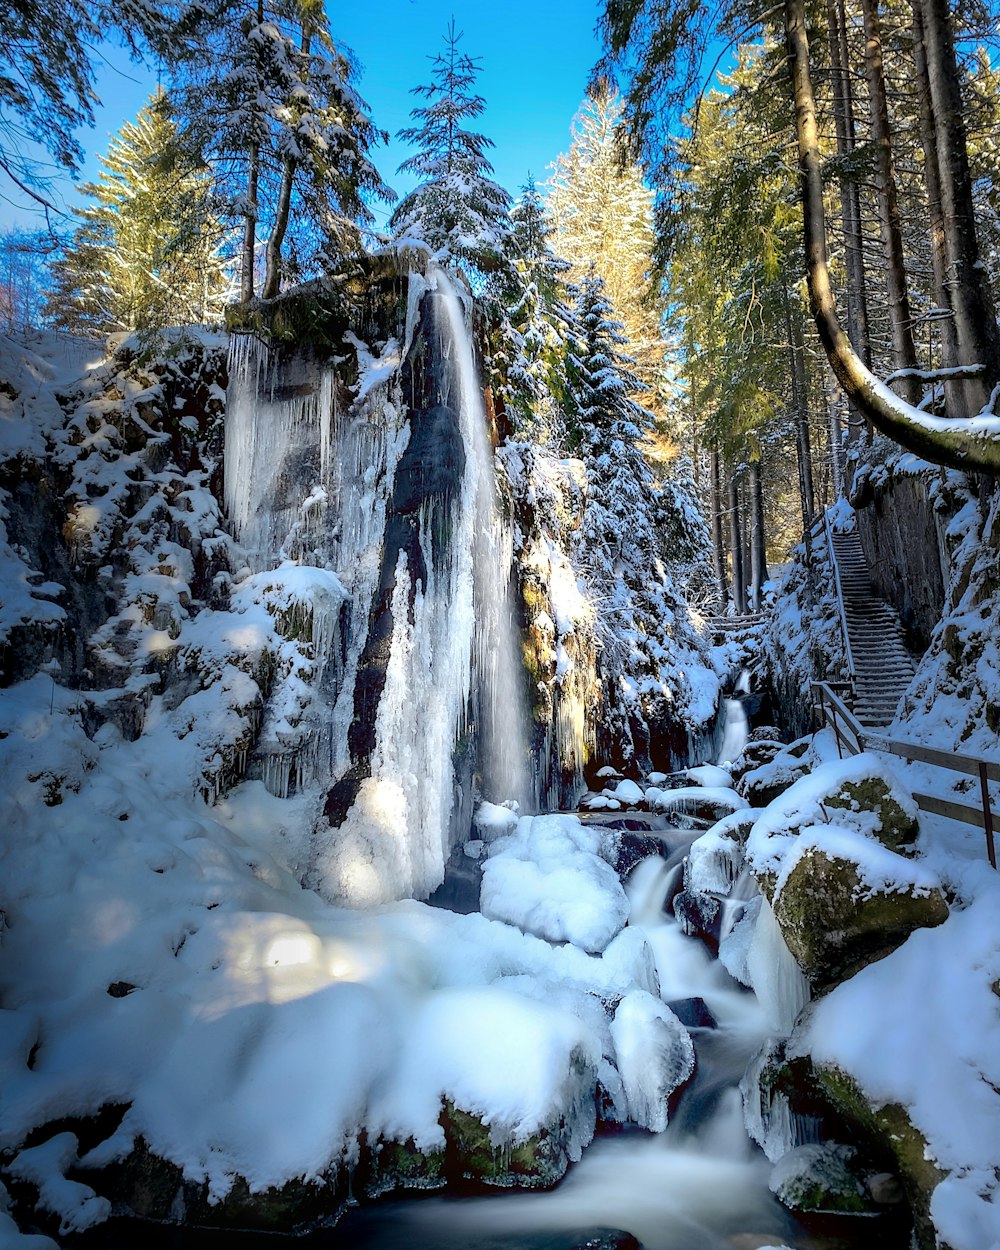 a waterfall in the middle of a snowy forest